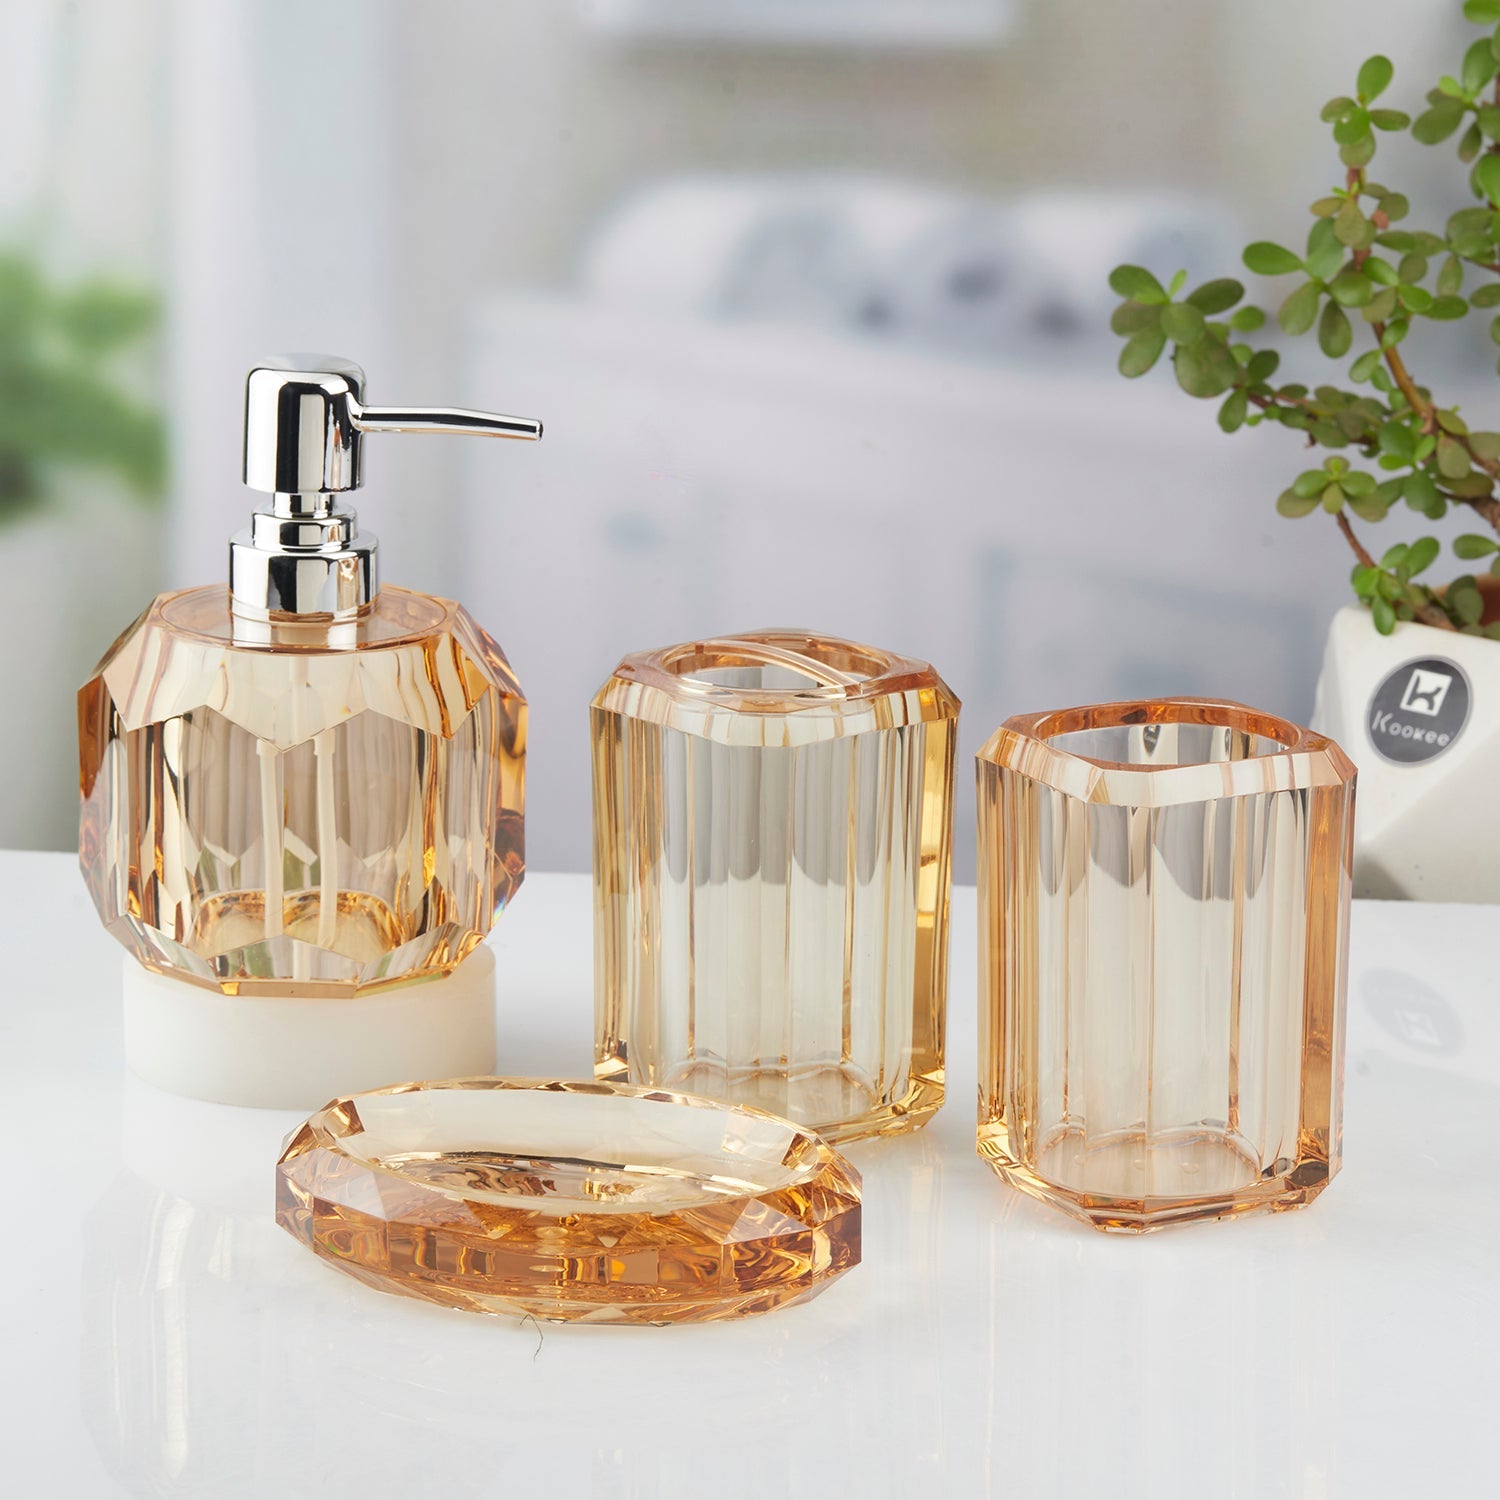 Kookee Acrylic Bathroom Accessories Set of 3, Modern Bath Set with Liquid handwash Soap Dispenser and Toothbrush holder, Luxury Gift Accessory for Home, Transparent Brown (10720)